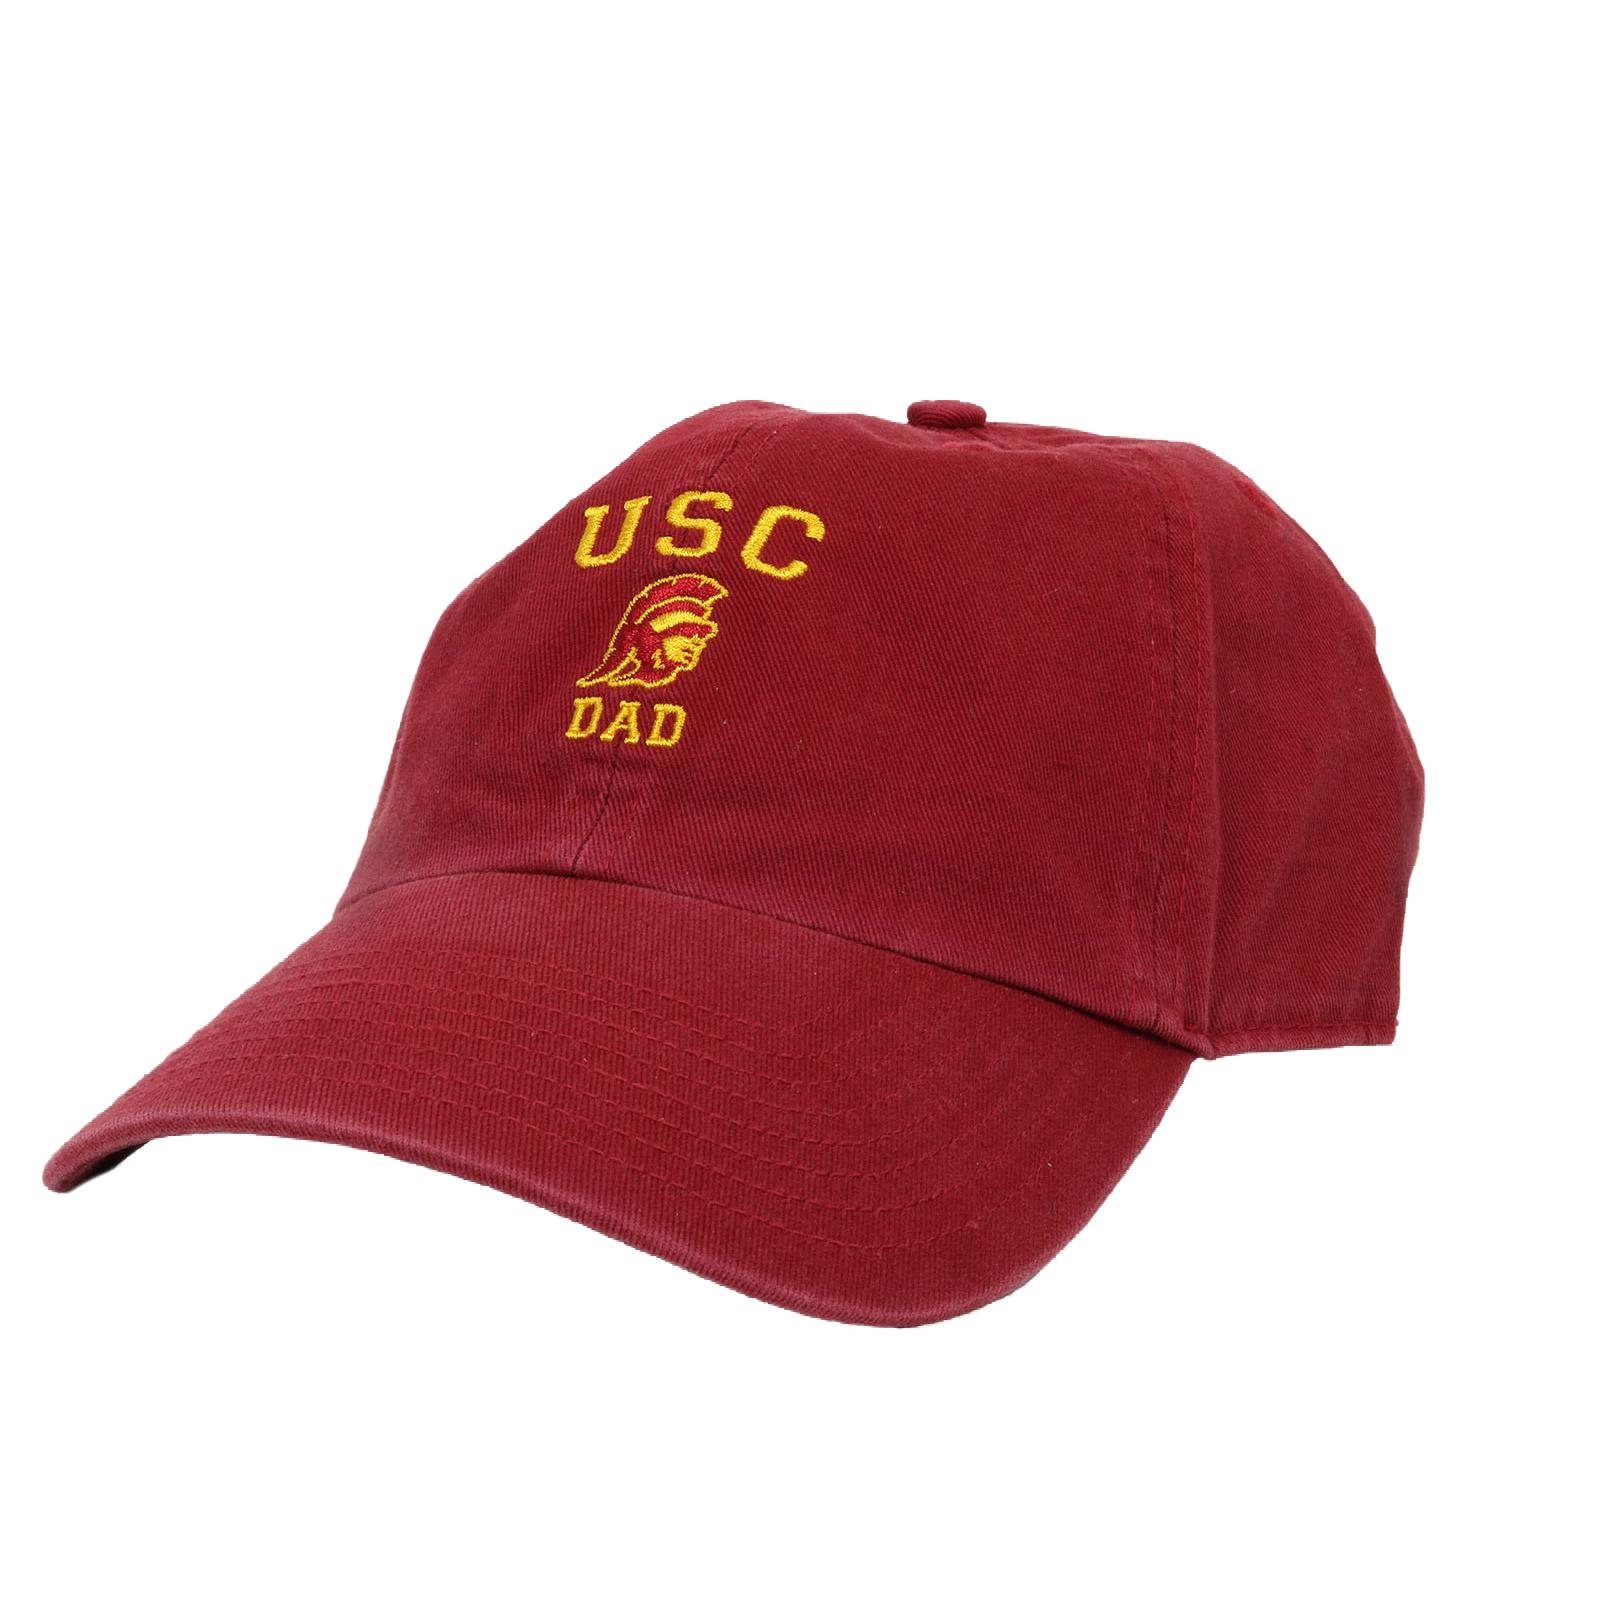 USC Tommy Head Dad 47 Clean Up Cap Cardinal image01